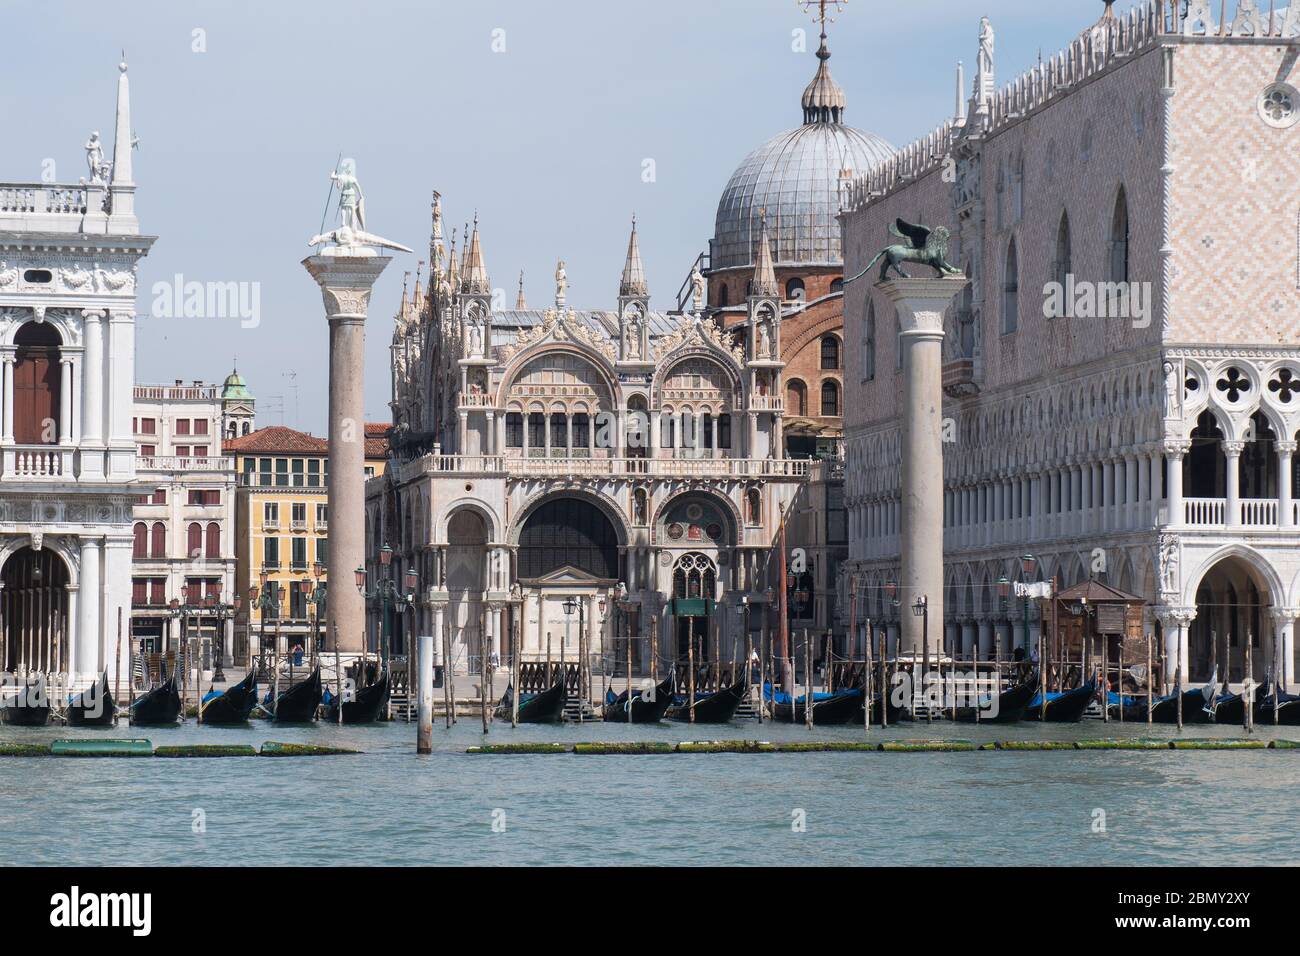 VENICE, ITALY - MAY 08: A view of the Ducale palace, the basilica of St. Mark during the lockdown for containing the spread of Coronavirus. Stock Photo